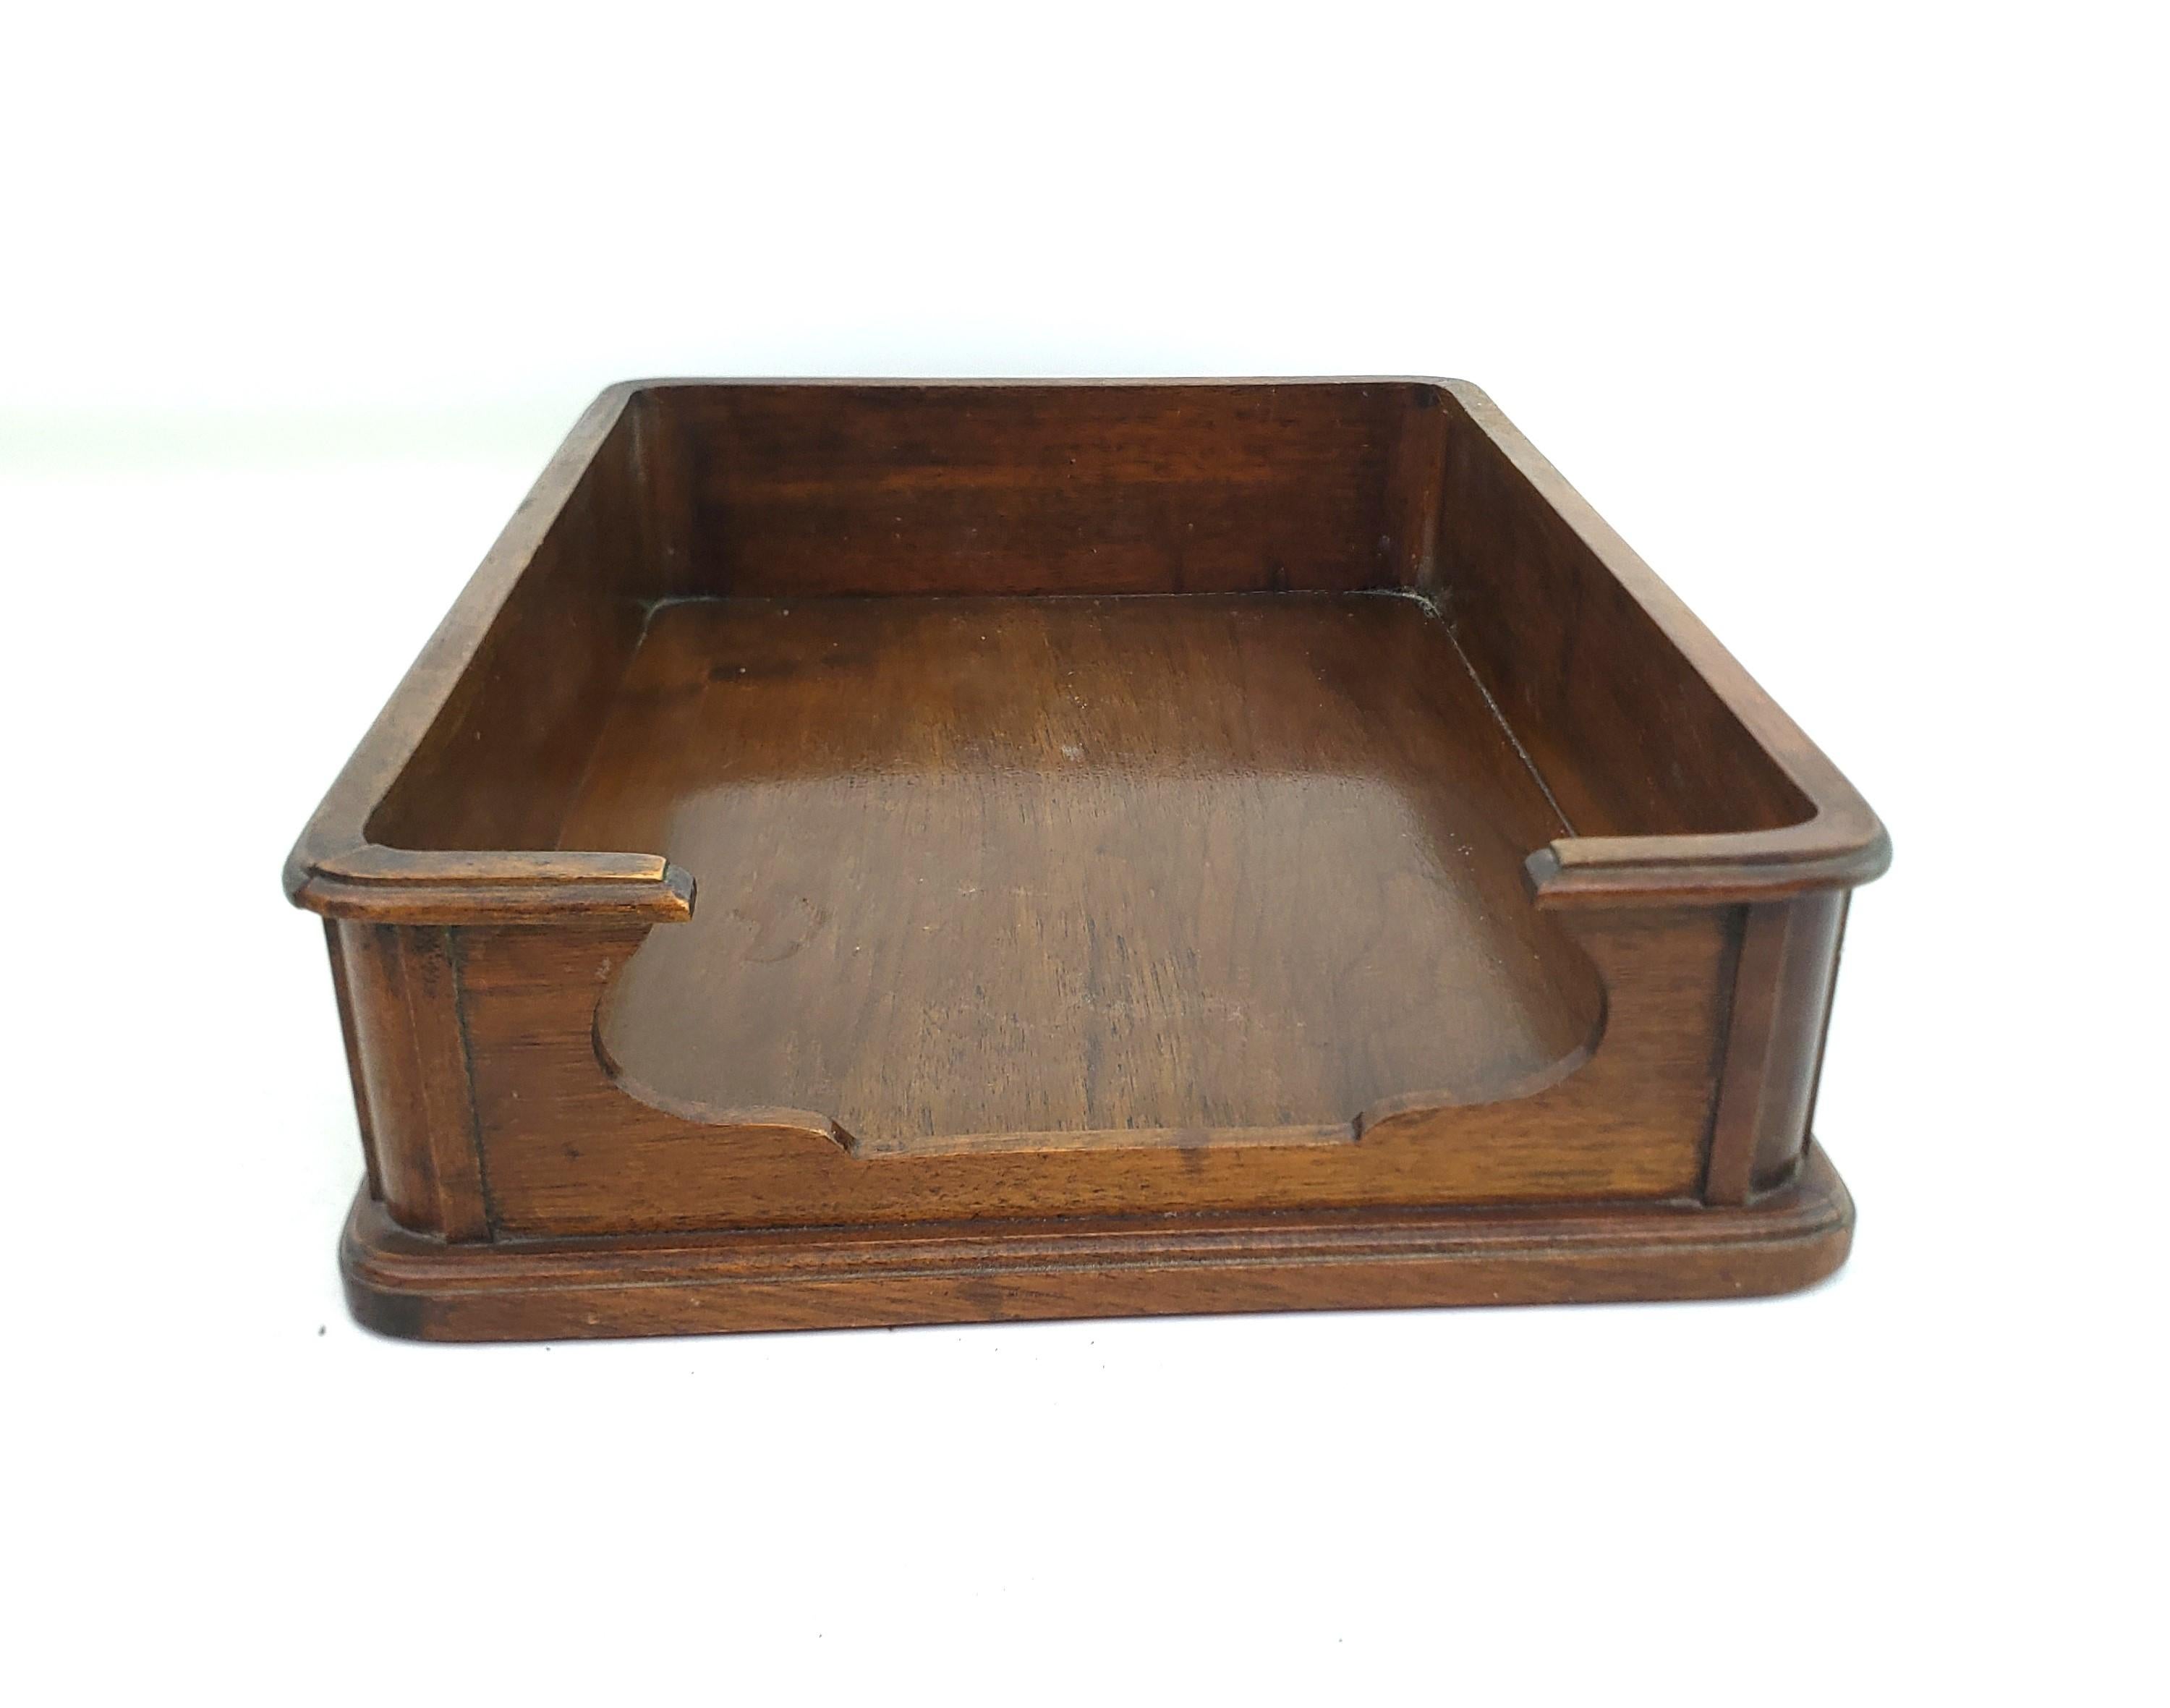 This antique executive desk tray has no maker's signature, but presumed to have originated from England and date to approximately 1920 and done in the period style. The holder is constructed of walnut with a raised top rail and stepped base with